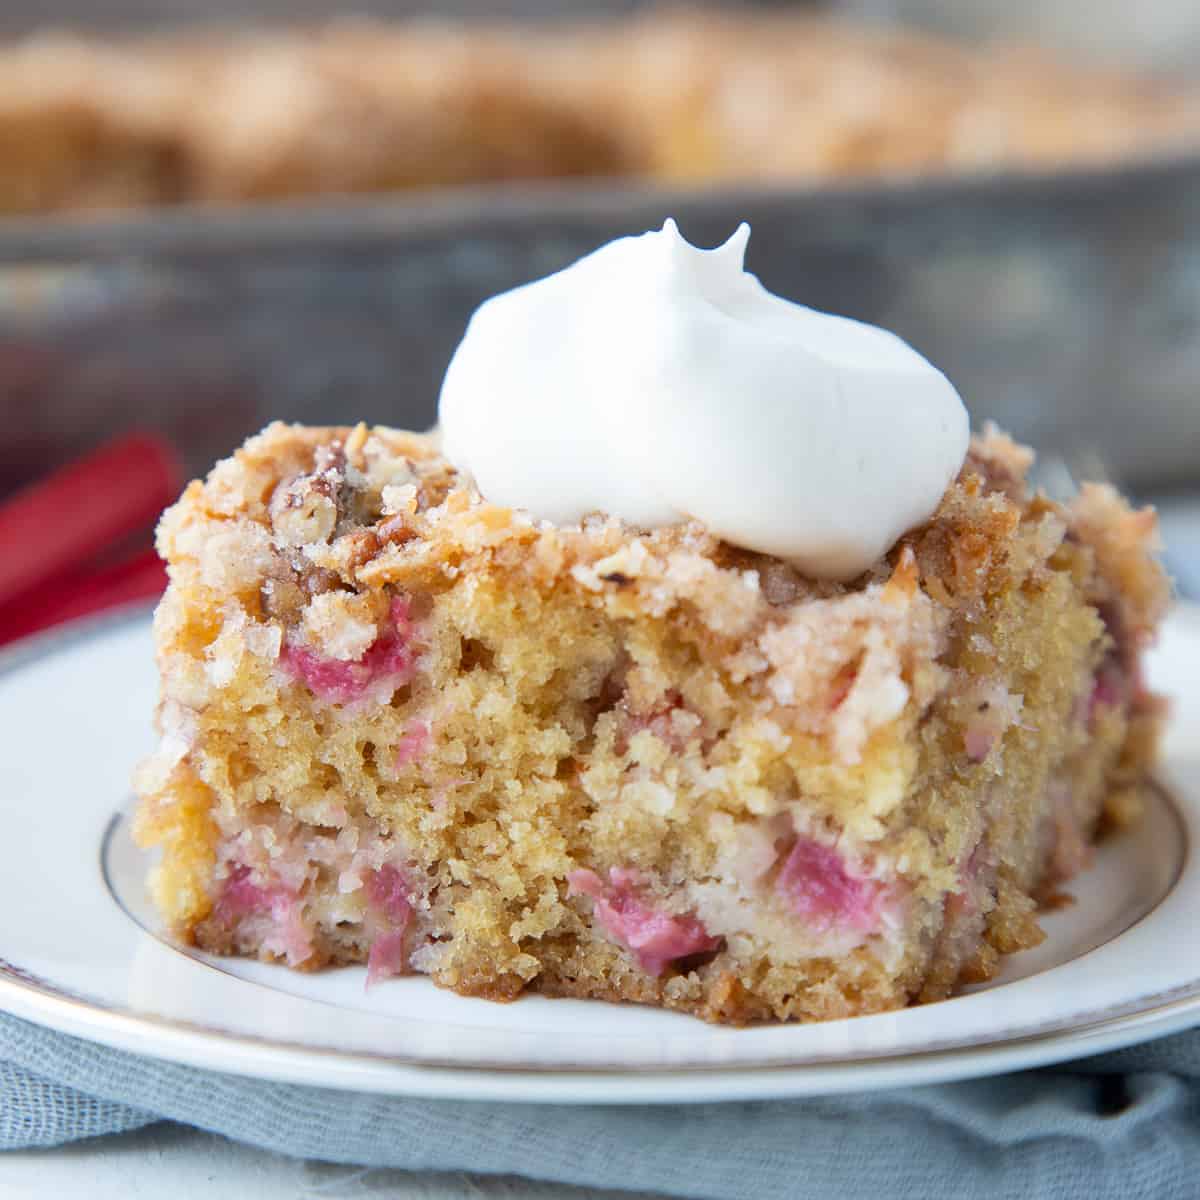 slice of rhubarb cake on a white plate topped with whipped cream.